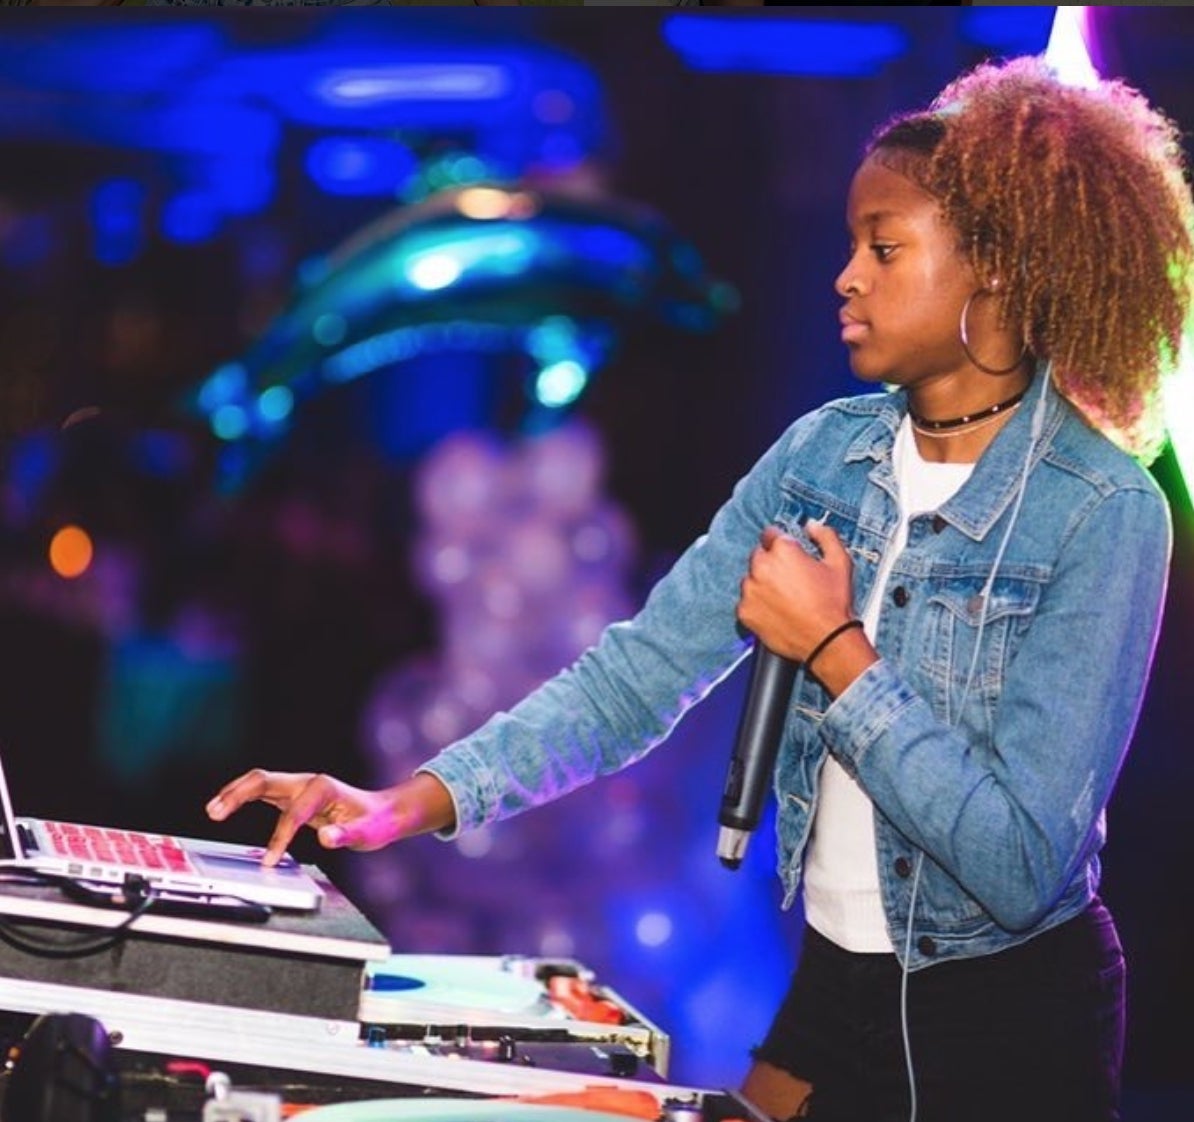 #BlackGirlMagic: This 21-Year-Old DJ Has The Internet Going Crazy With Her "Black TV Show Theme Songs" Mix
